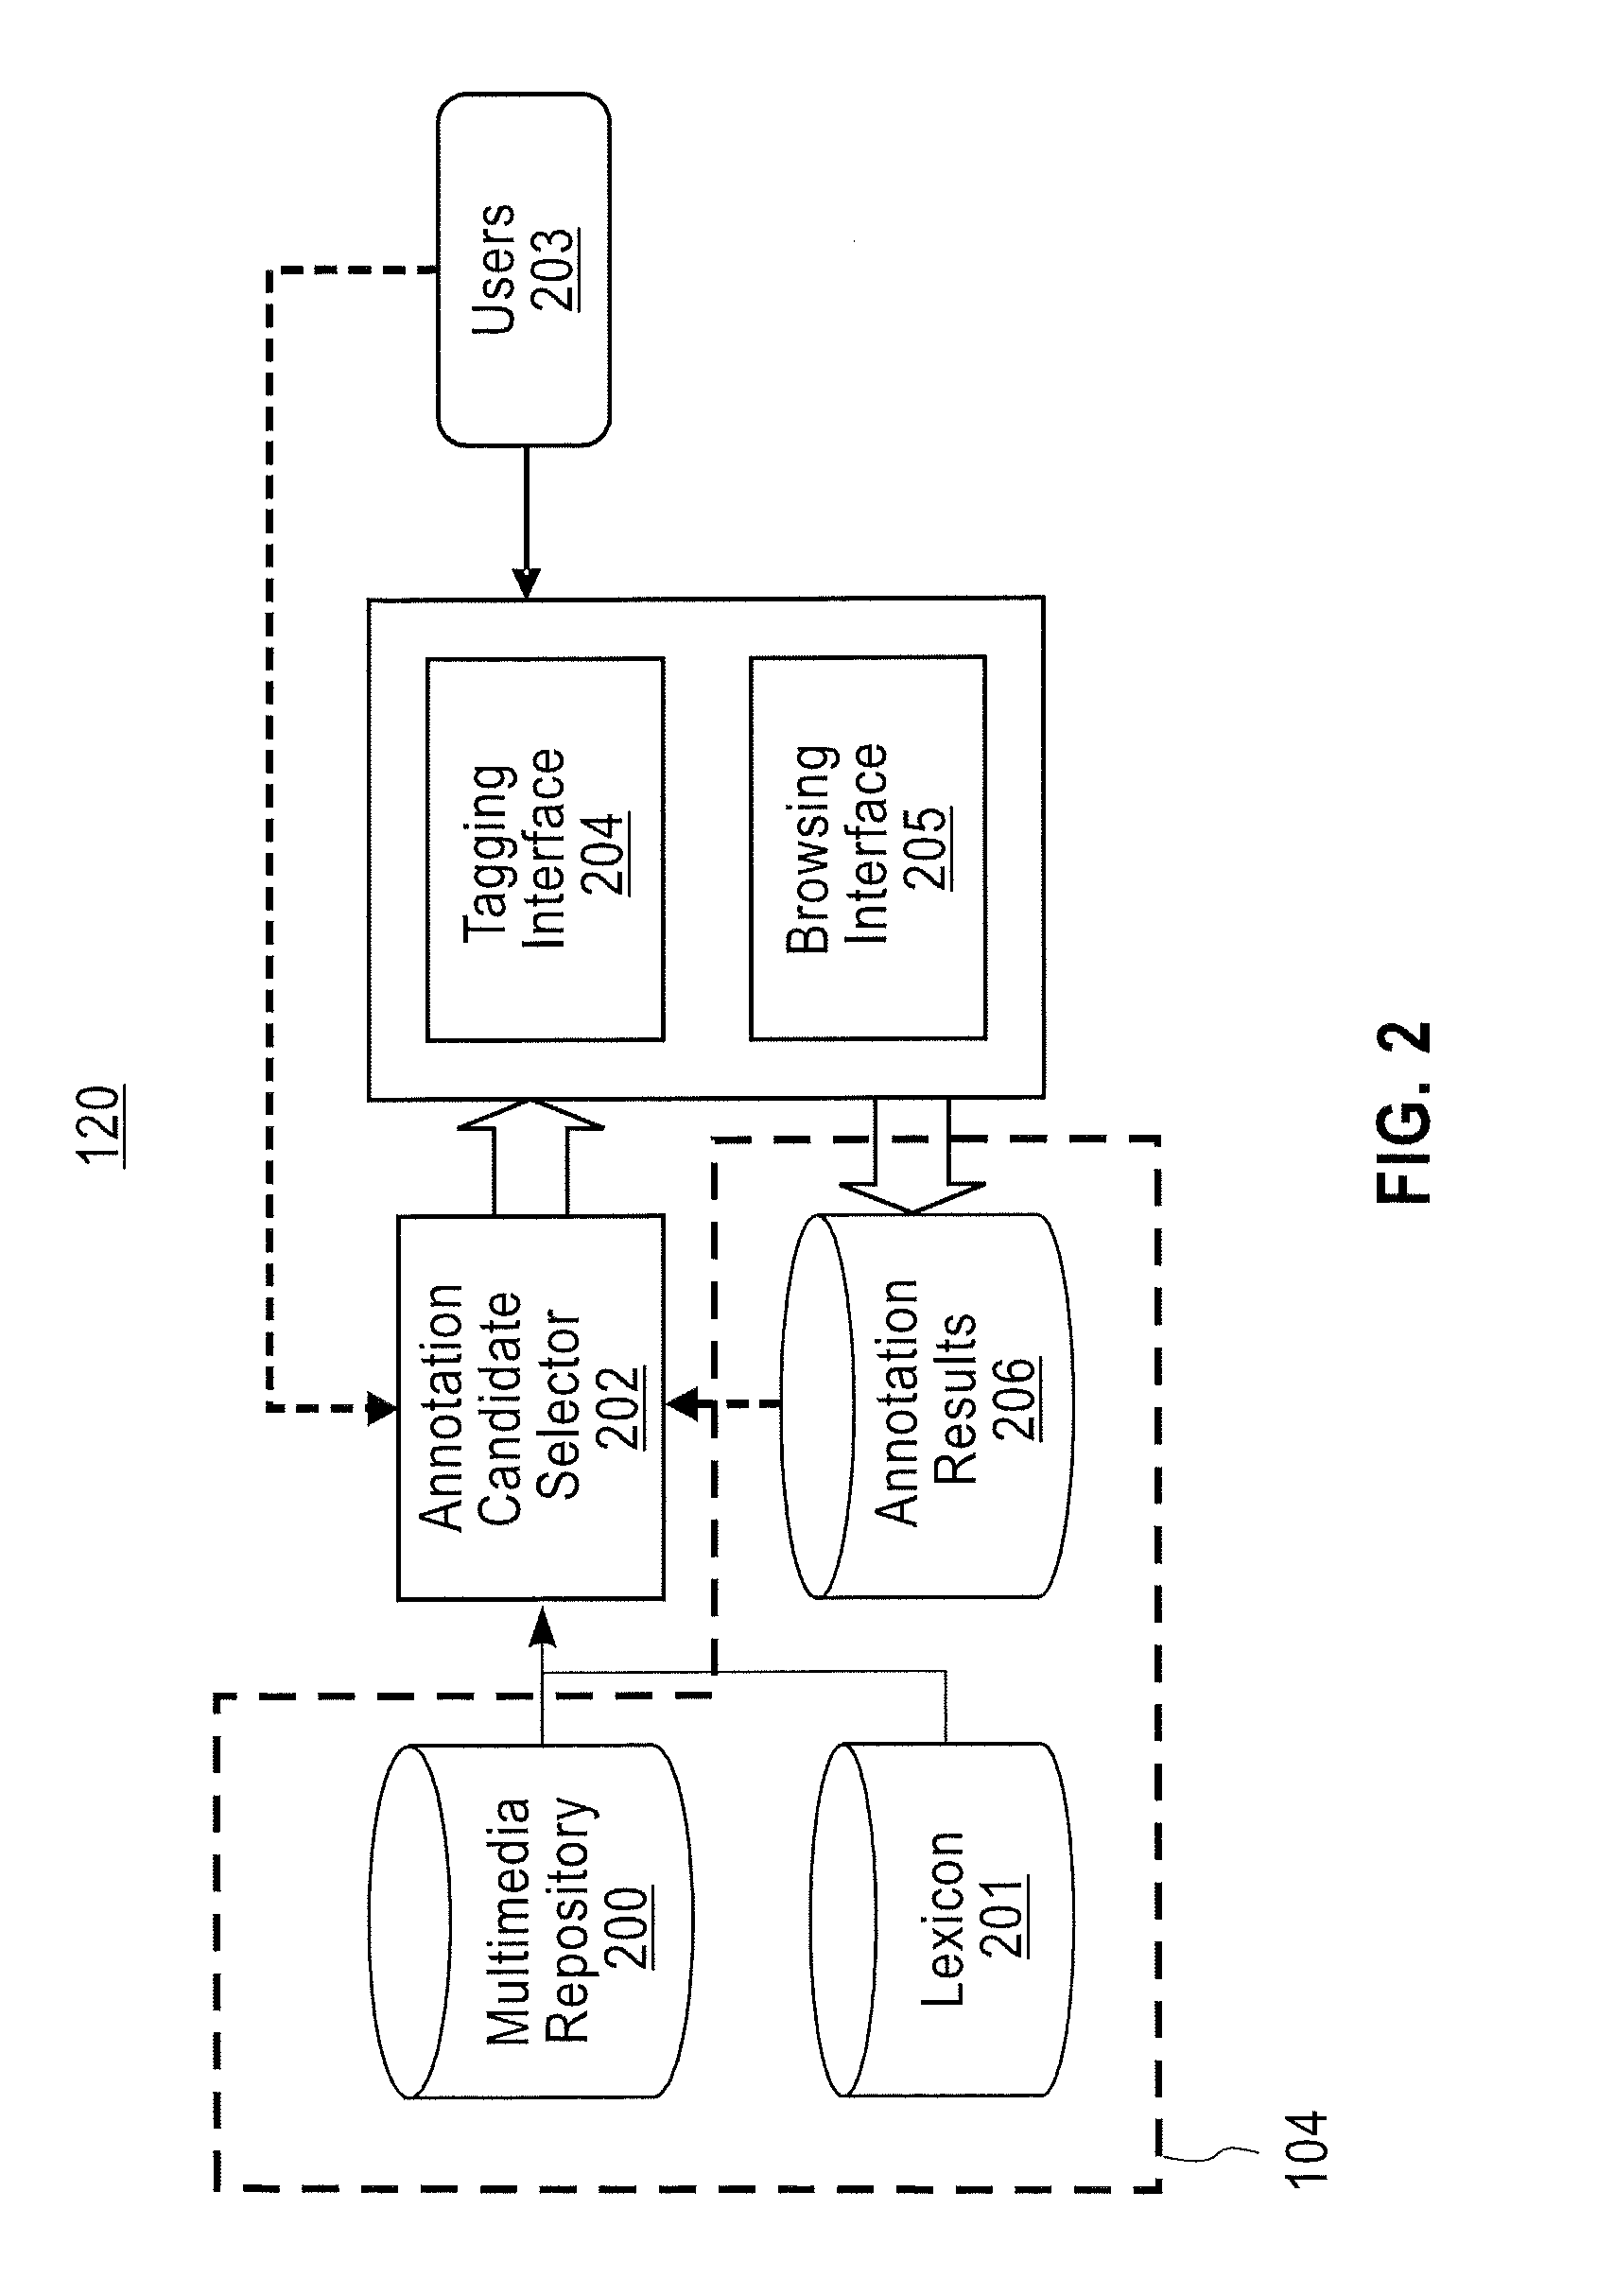 Method and apparatus for hybrid tagging and browsing annotation for multimedia content